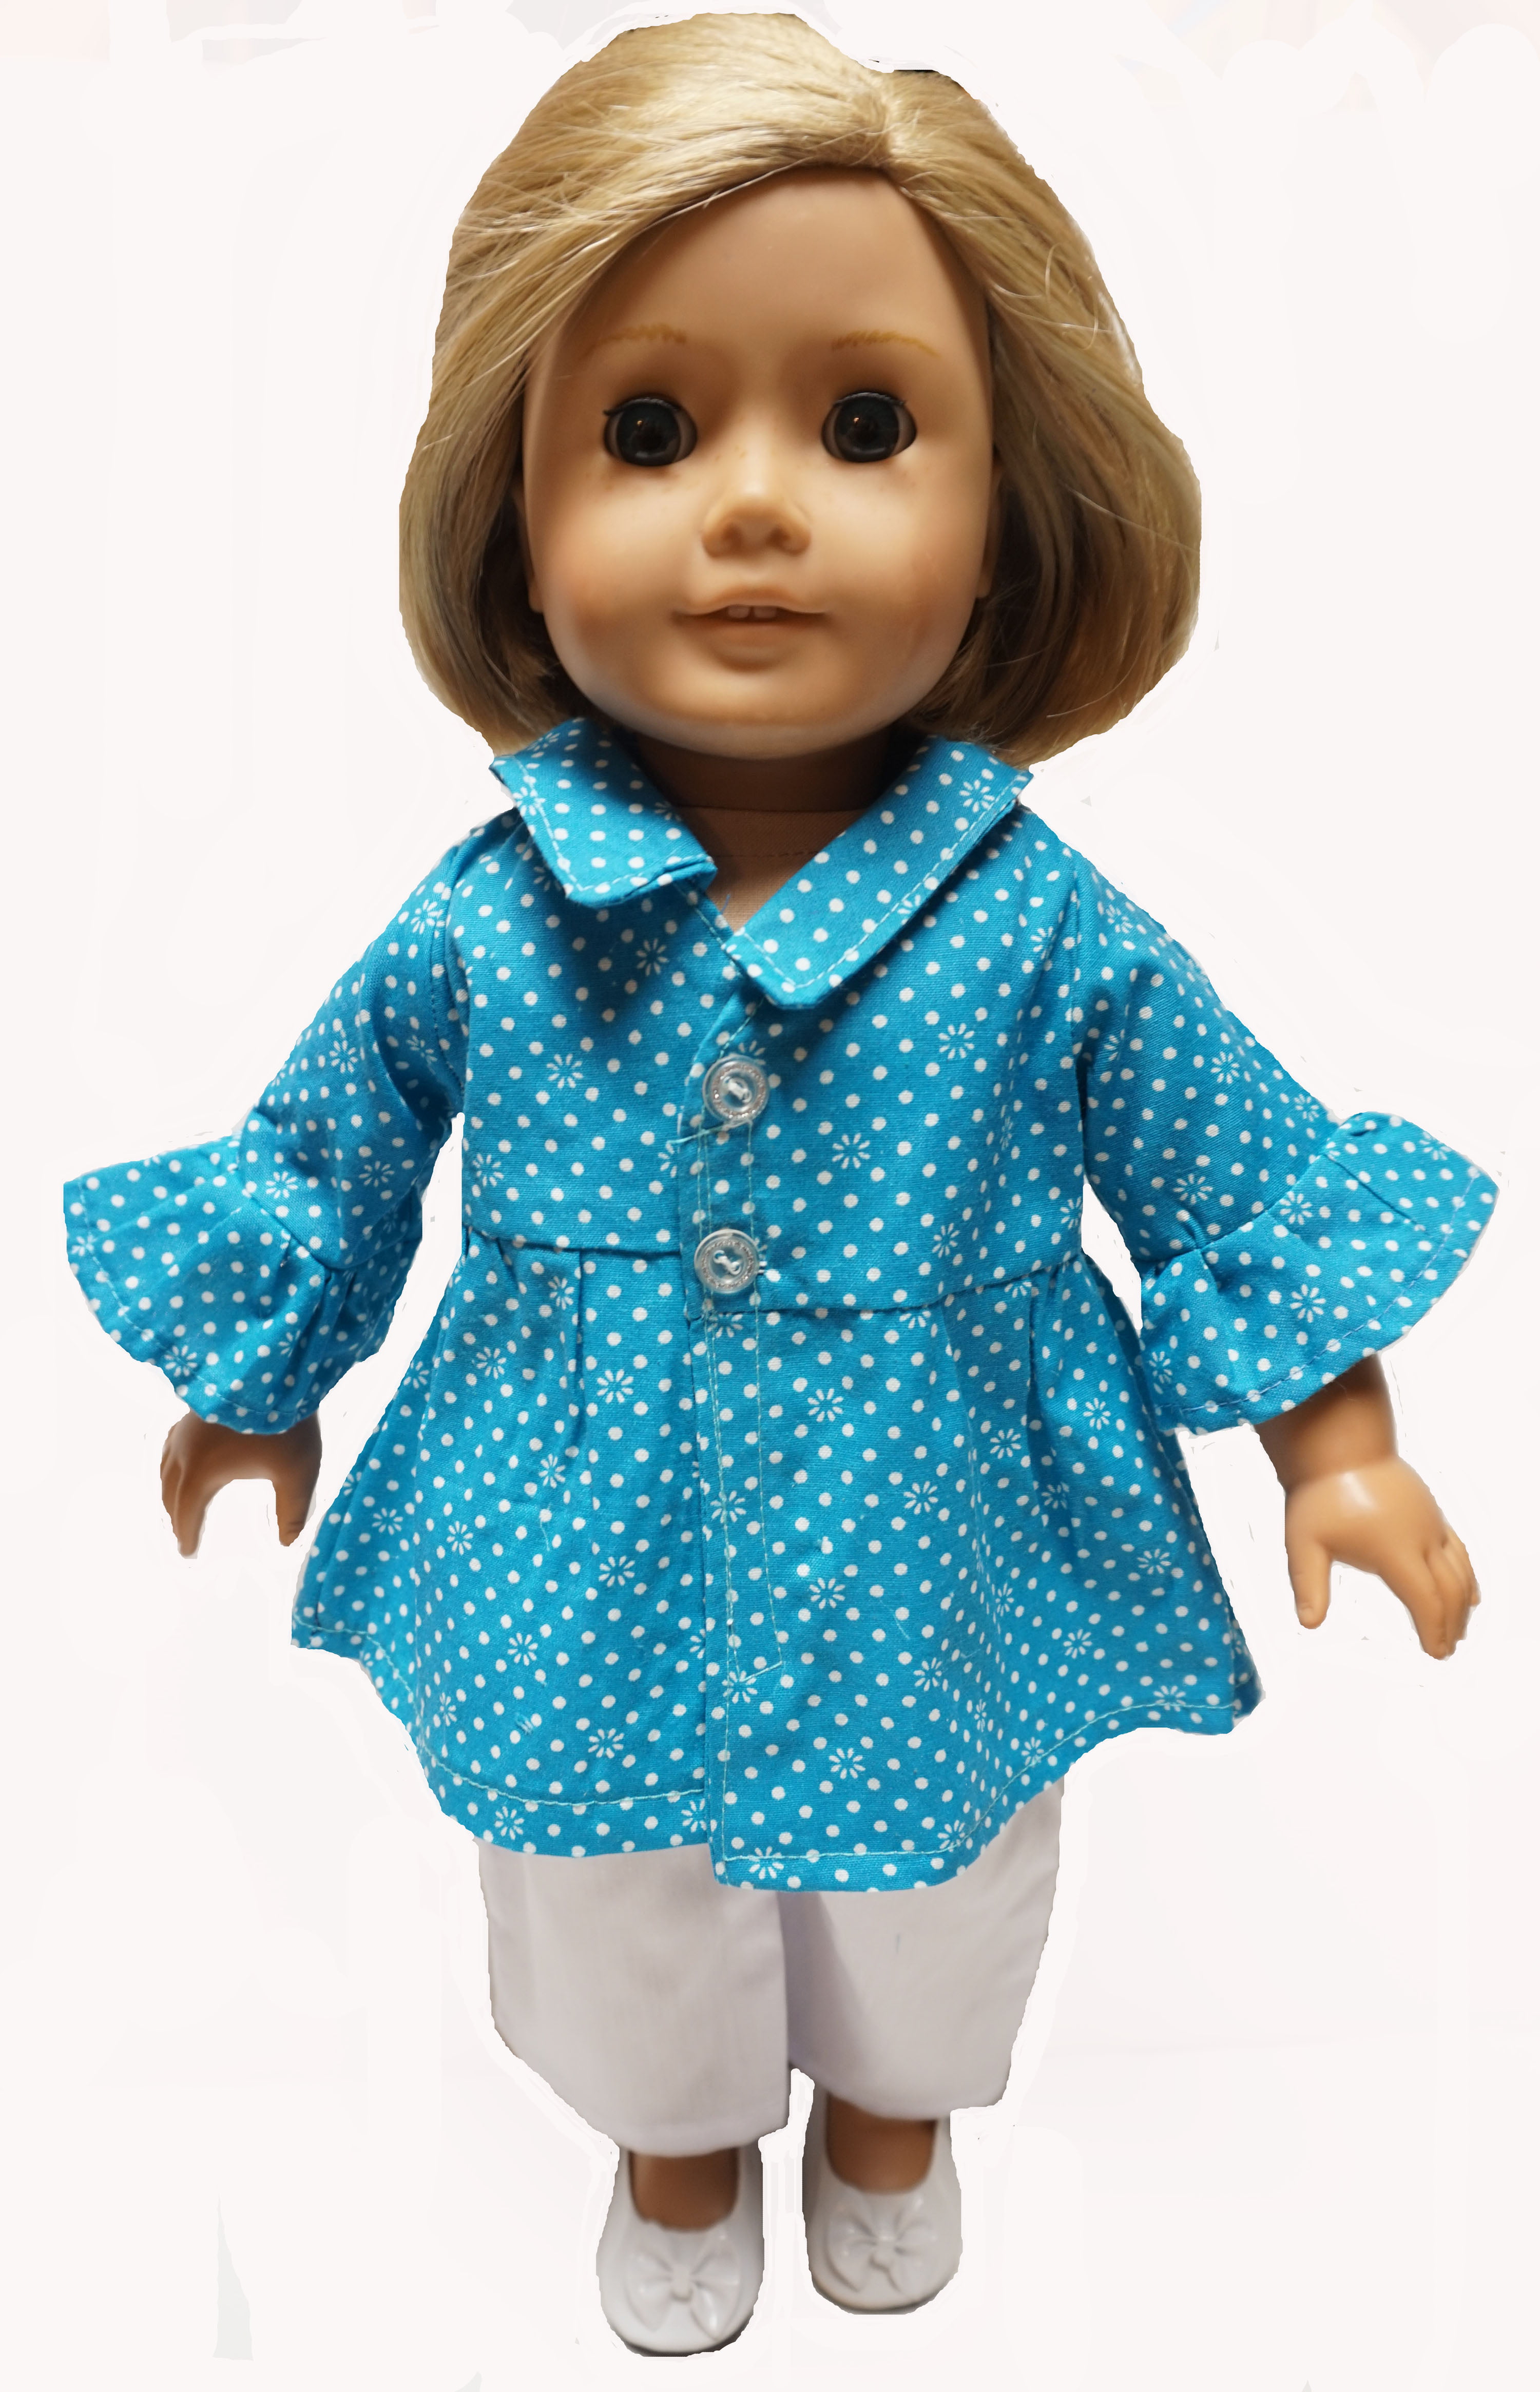 Doll Clothes I8 Inch American Girl Dolls Our Generation Cotton Ruffle Sleeve Top